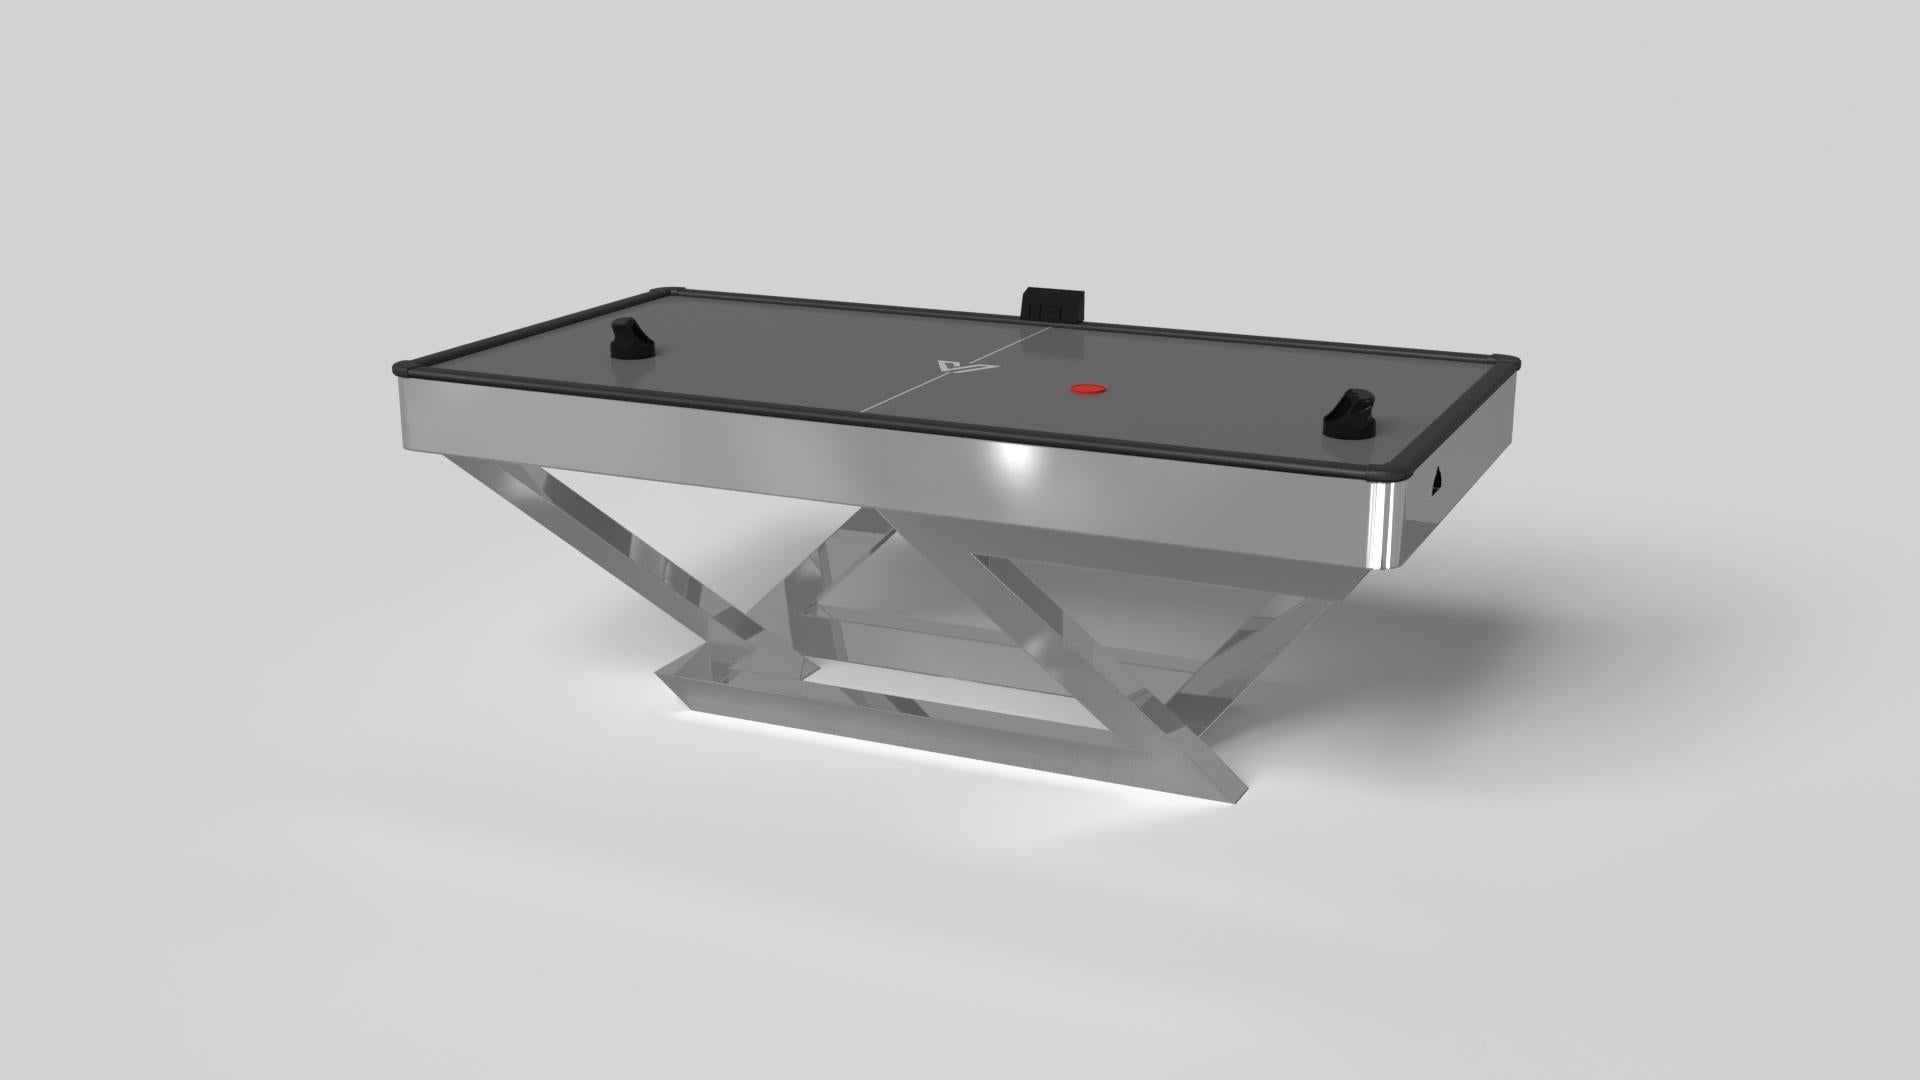 A contemporary composition of clean lines and sleek edges, the Trinity air hockey table in black with red accents is an elegant expression of modern design. Handcrafted and detailed with a regulation top for professional game play, this table offers